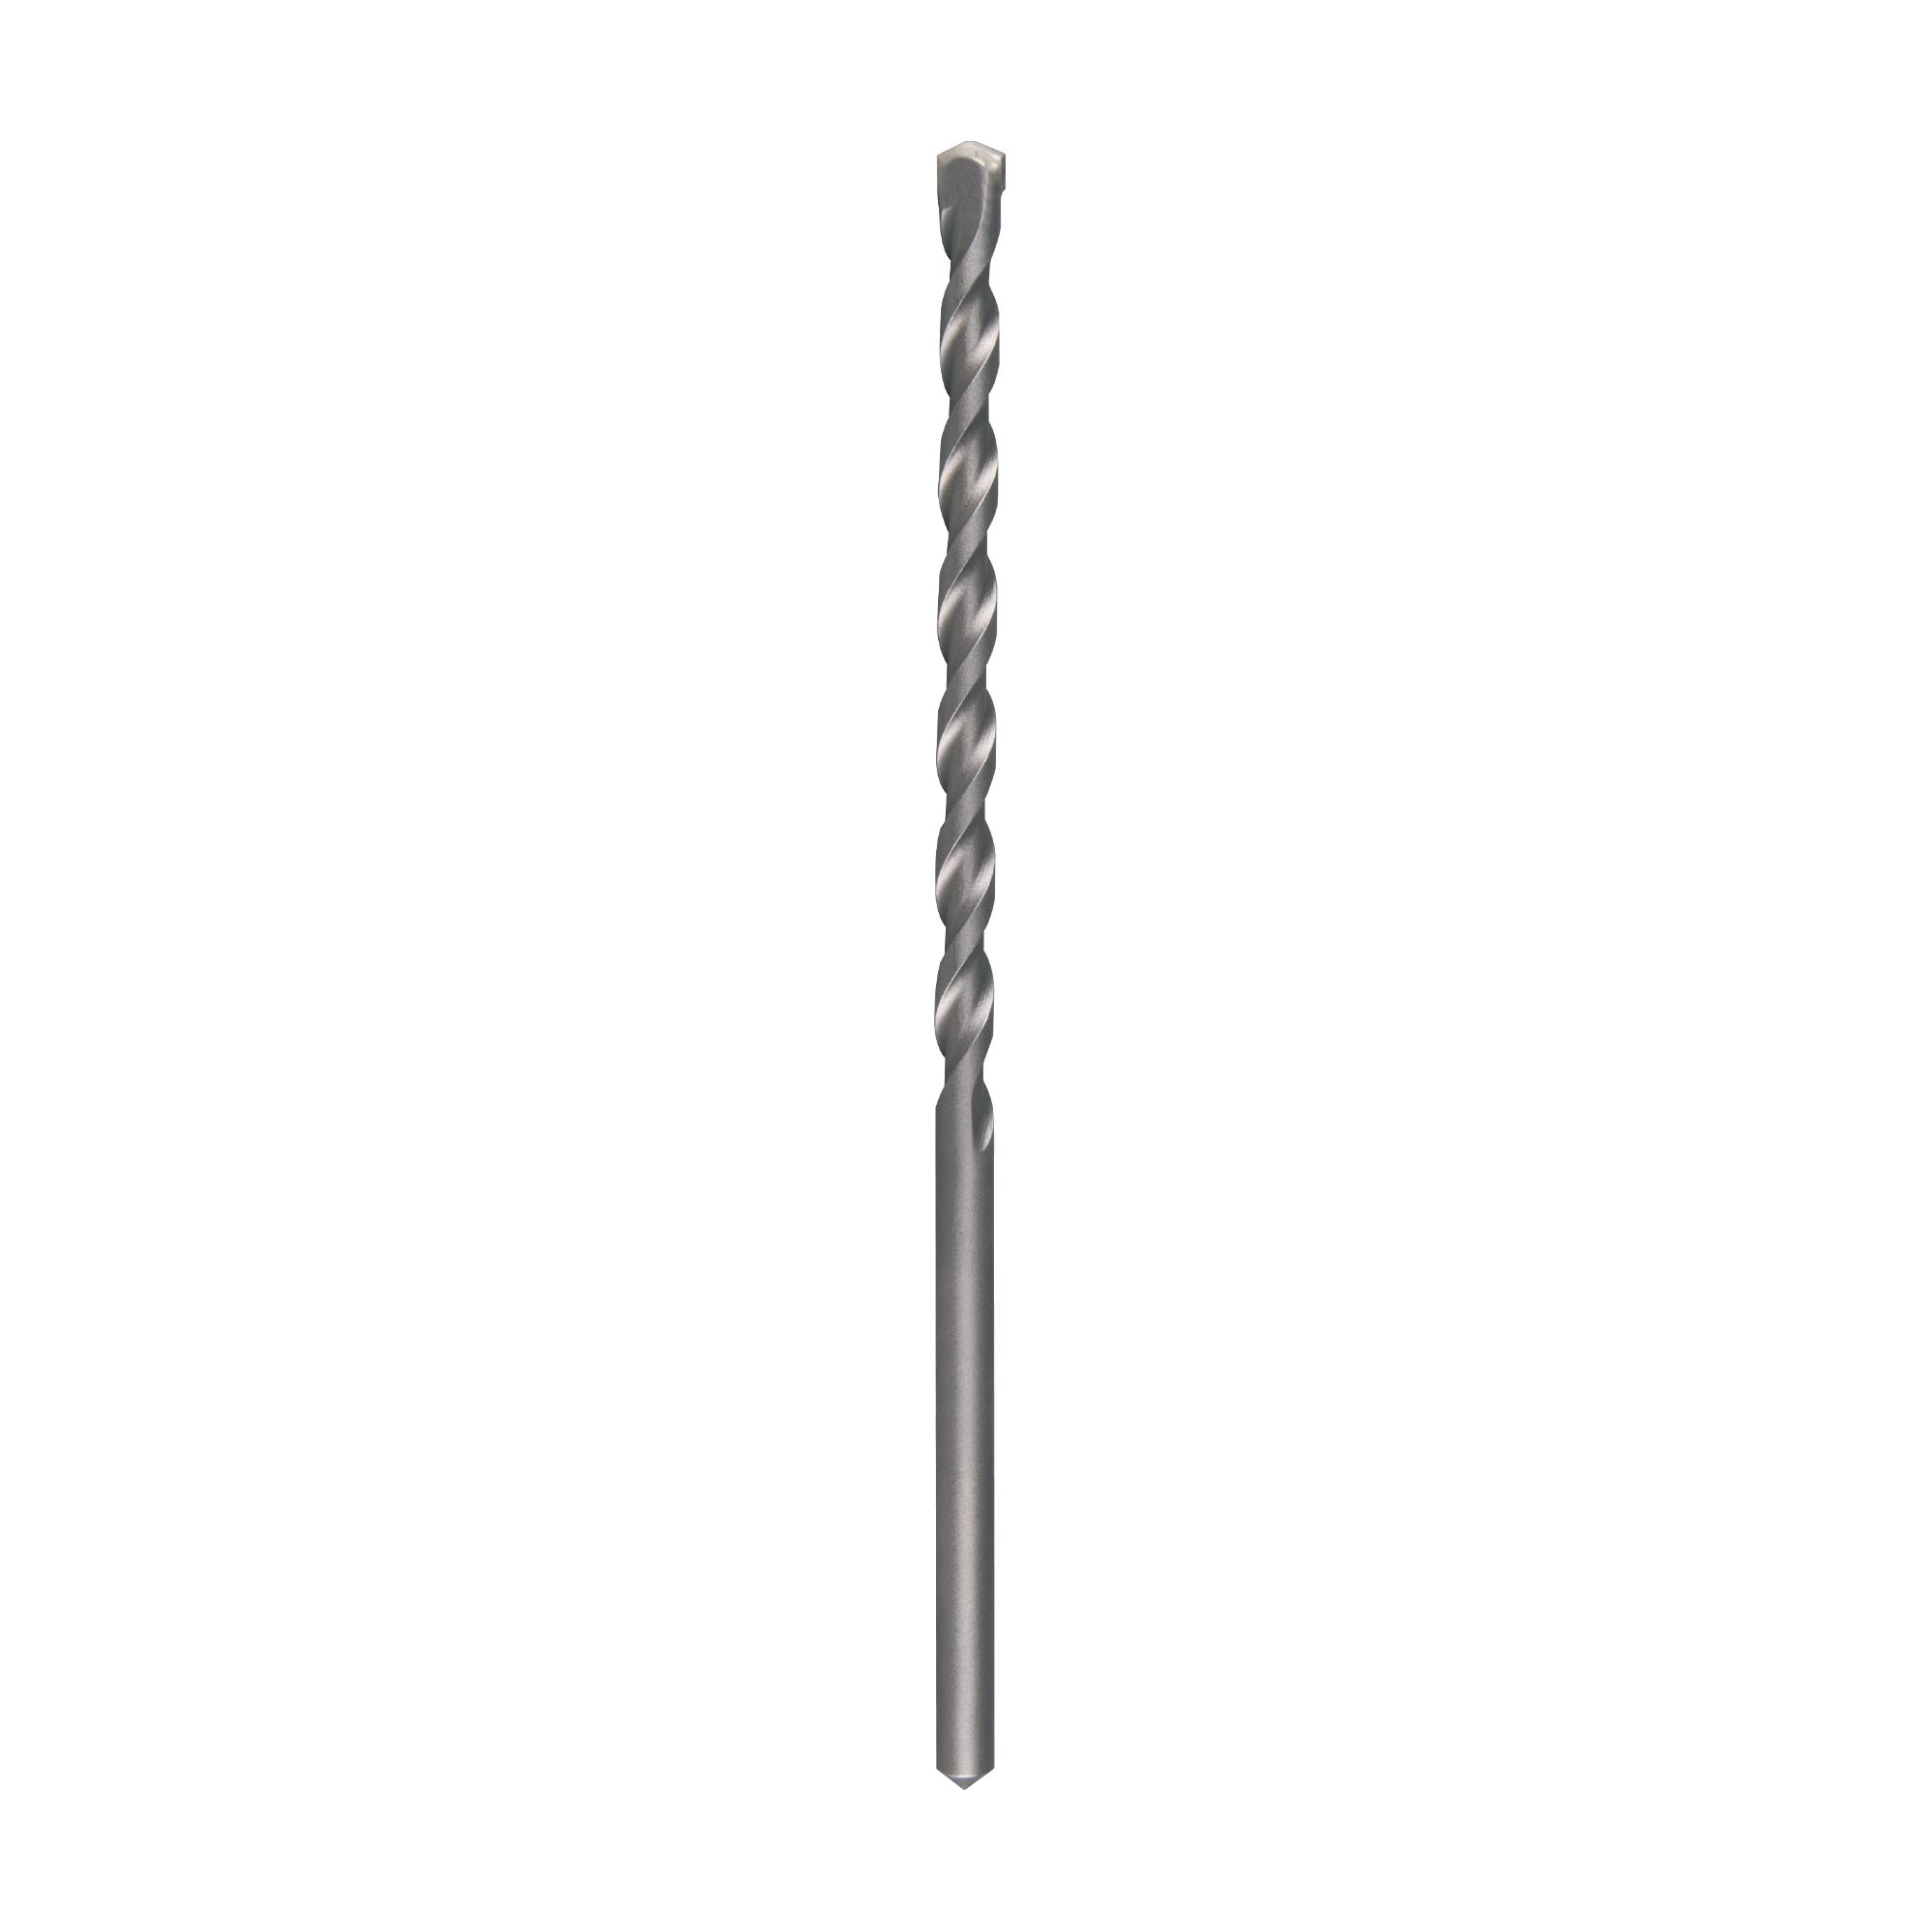 RUKO Percussion drill with carbide cutting edge and straight shank ISO 5468 - DIN 8039 209100